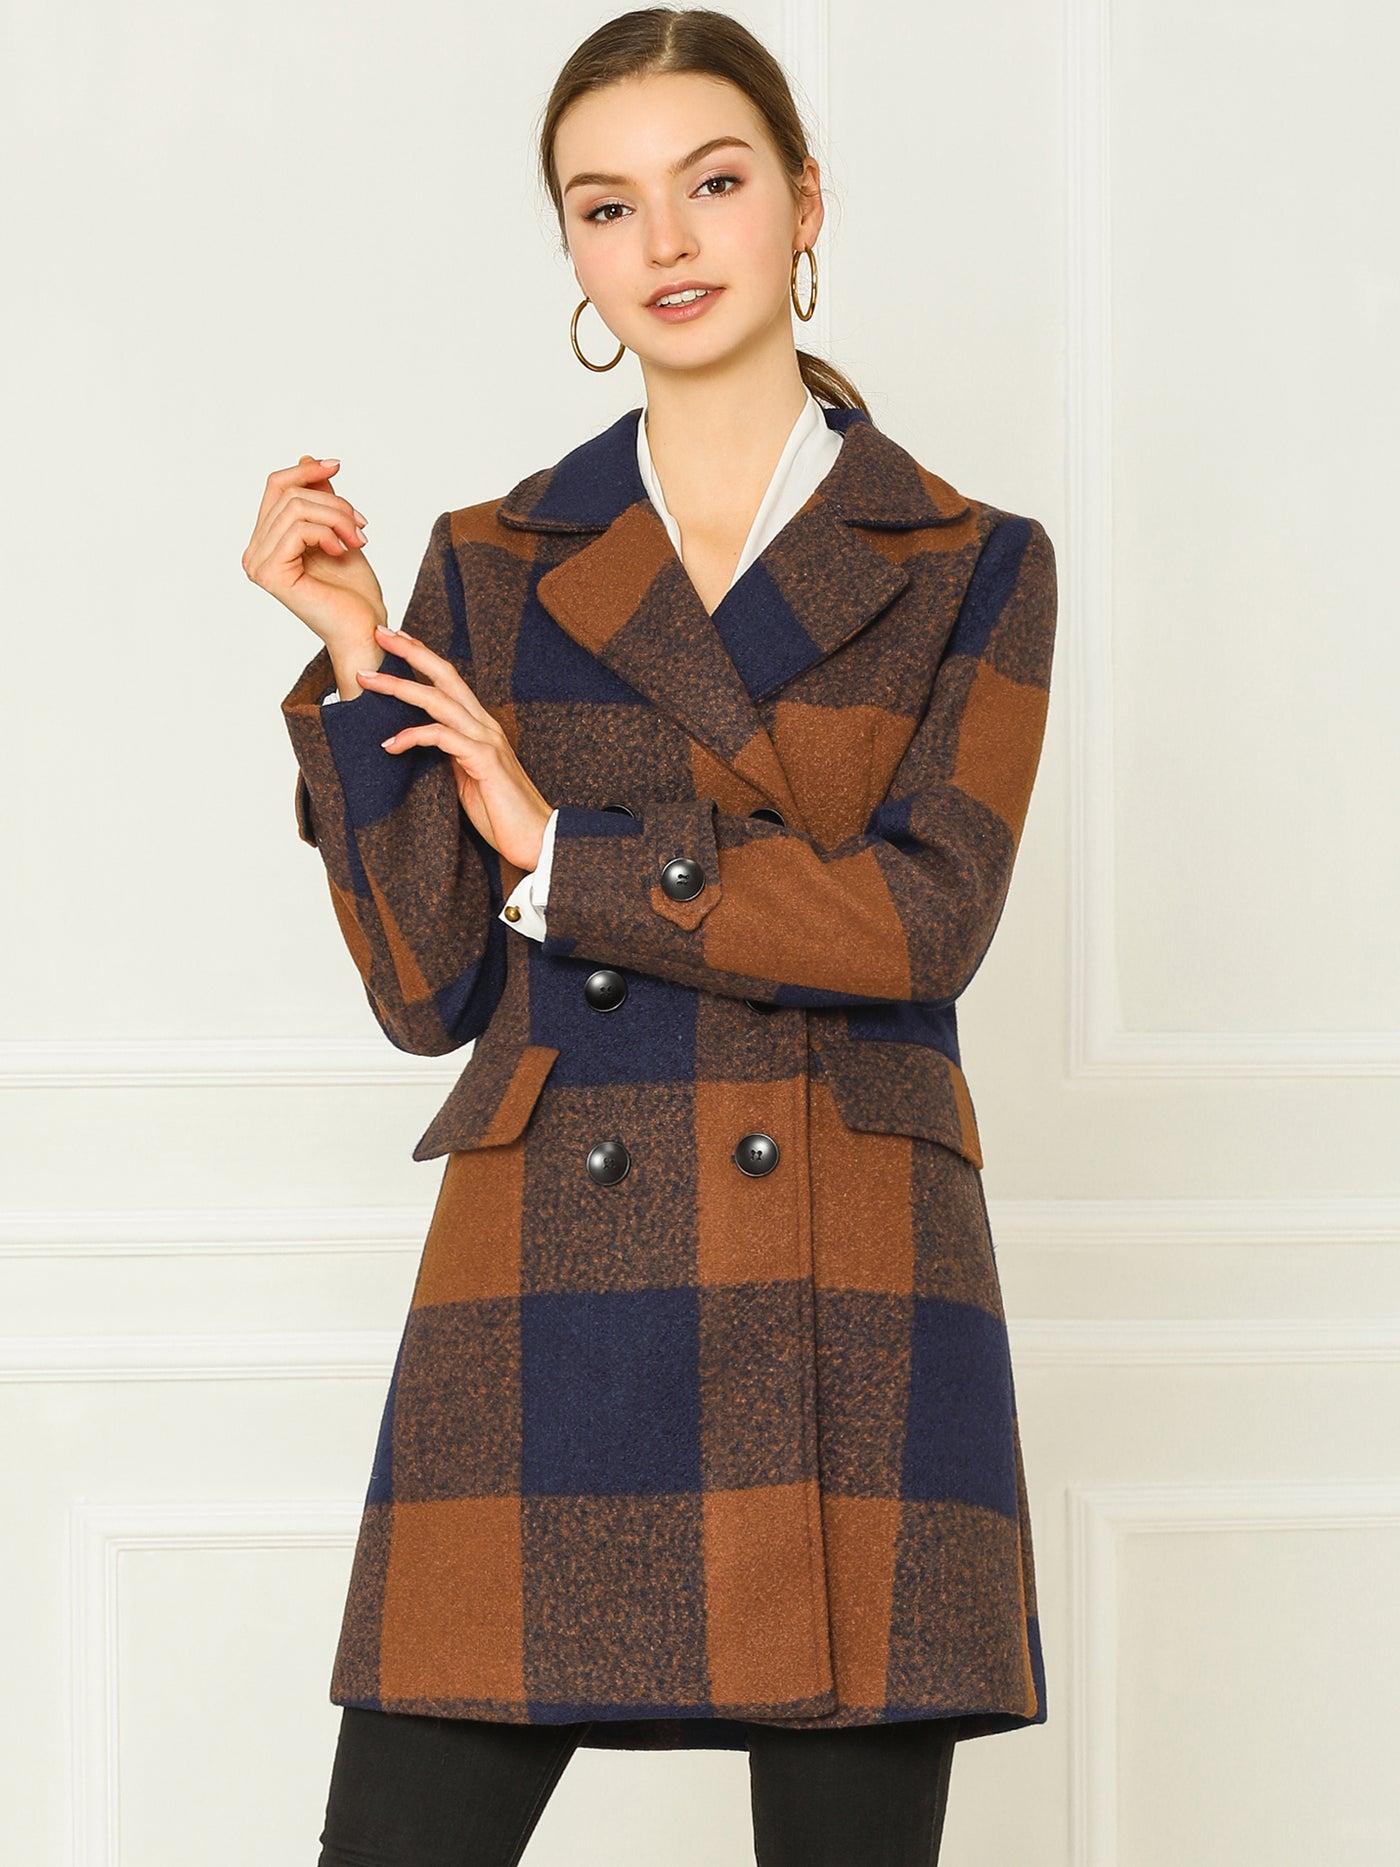 Allegra K Buffalo Checks Double Breasted Notched Lapel Plaid Trench Coat